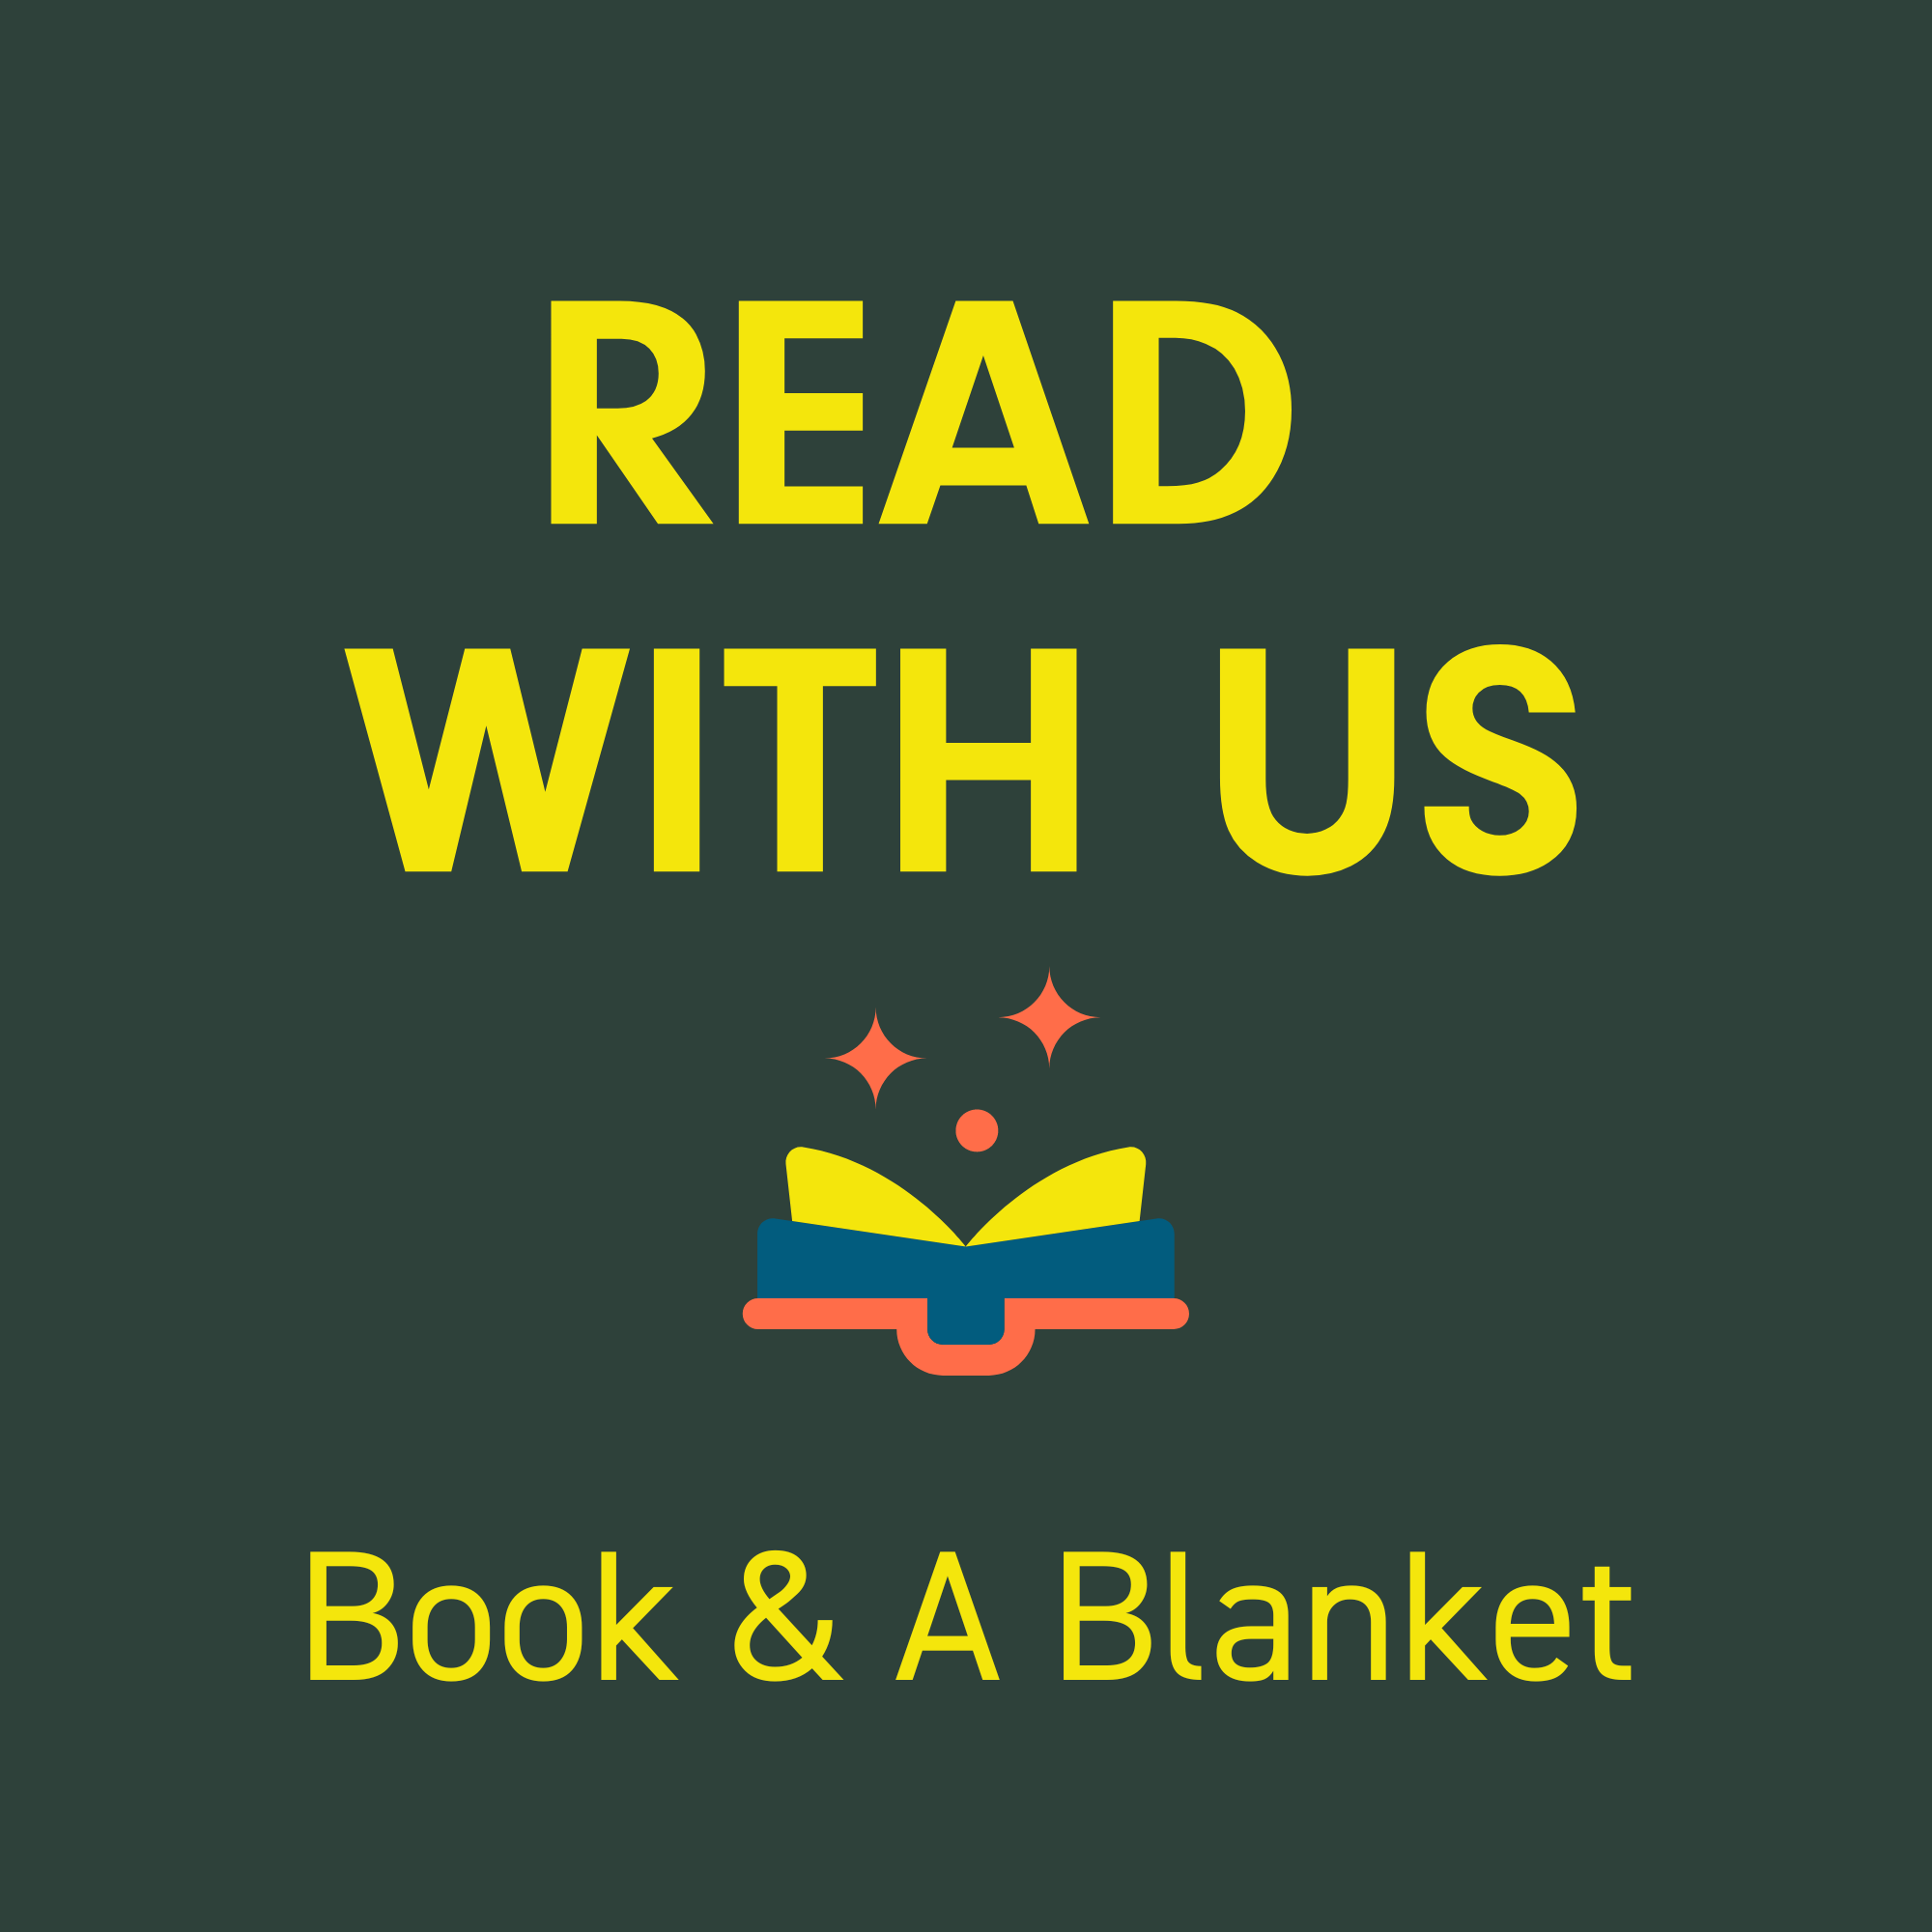 A graphic image on a dark green background with yellow text that says READ WITH US Book & A Blanket